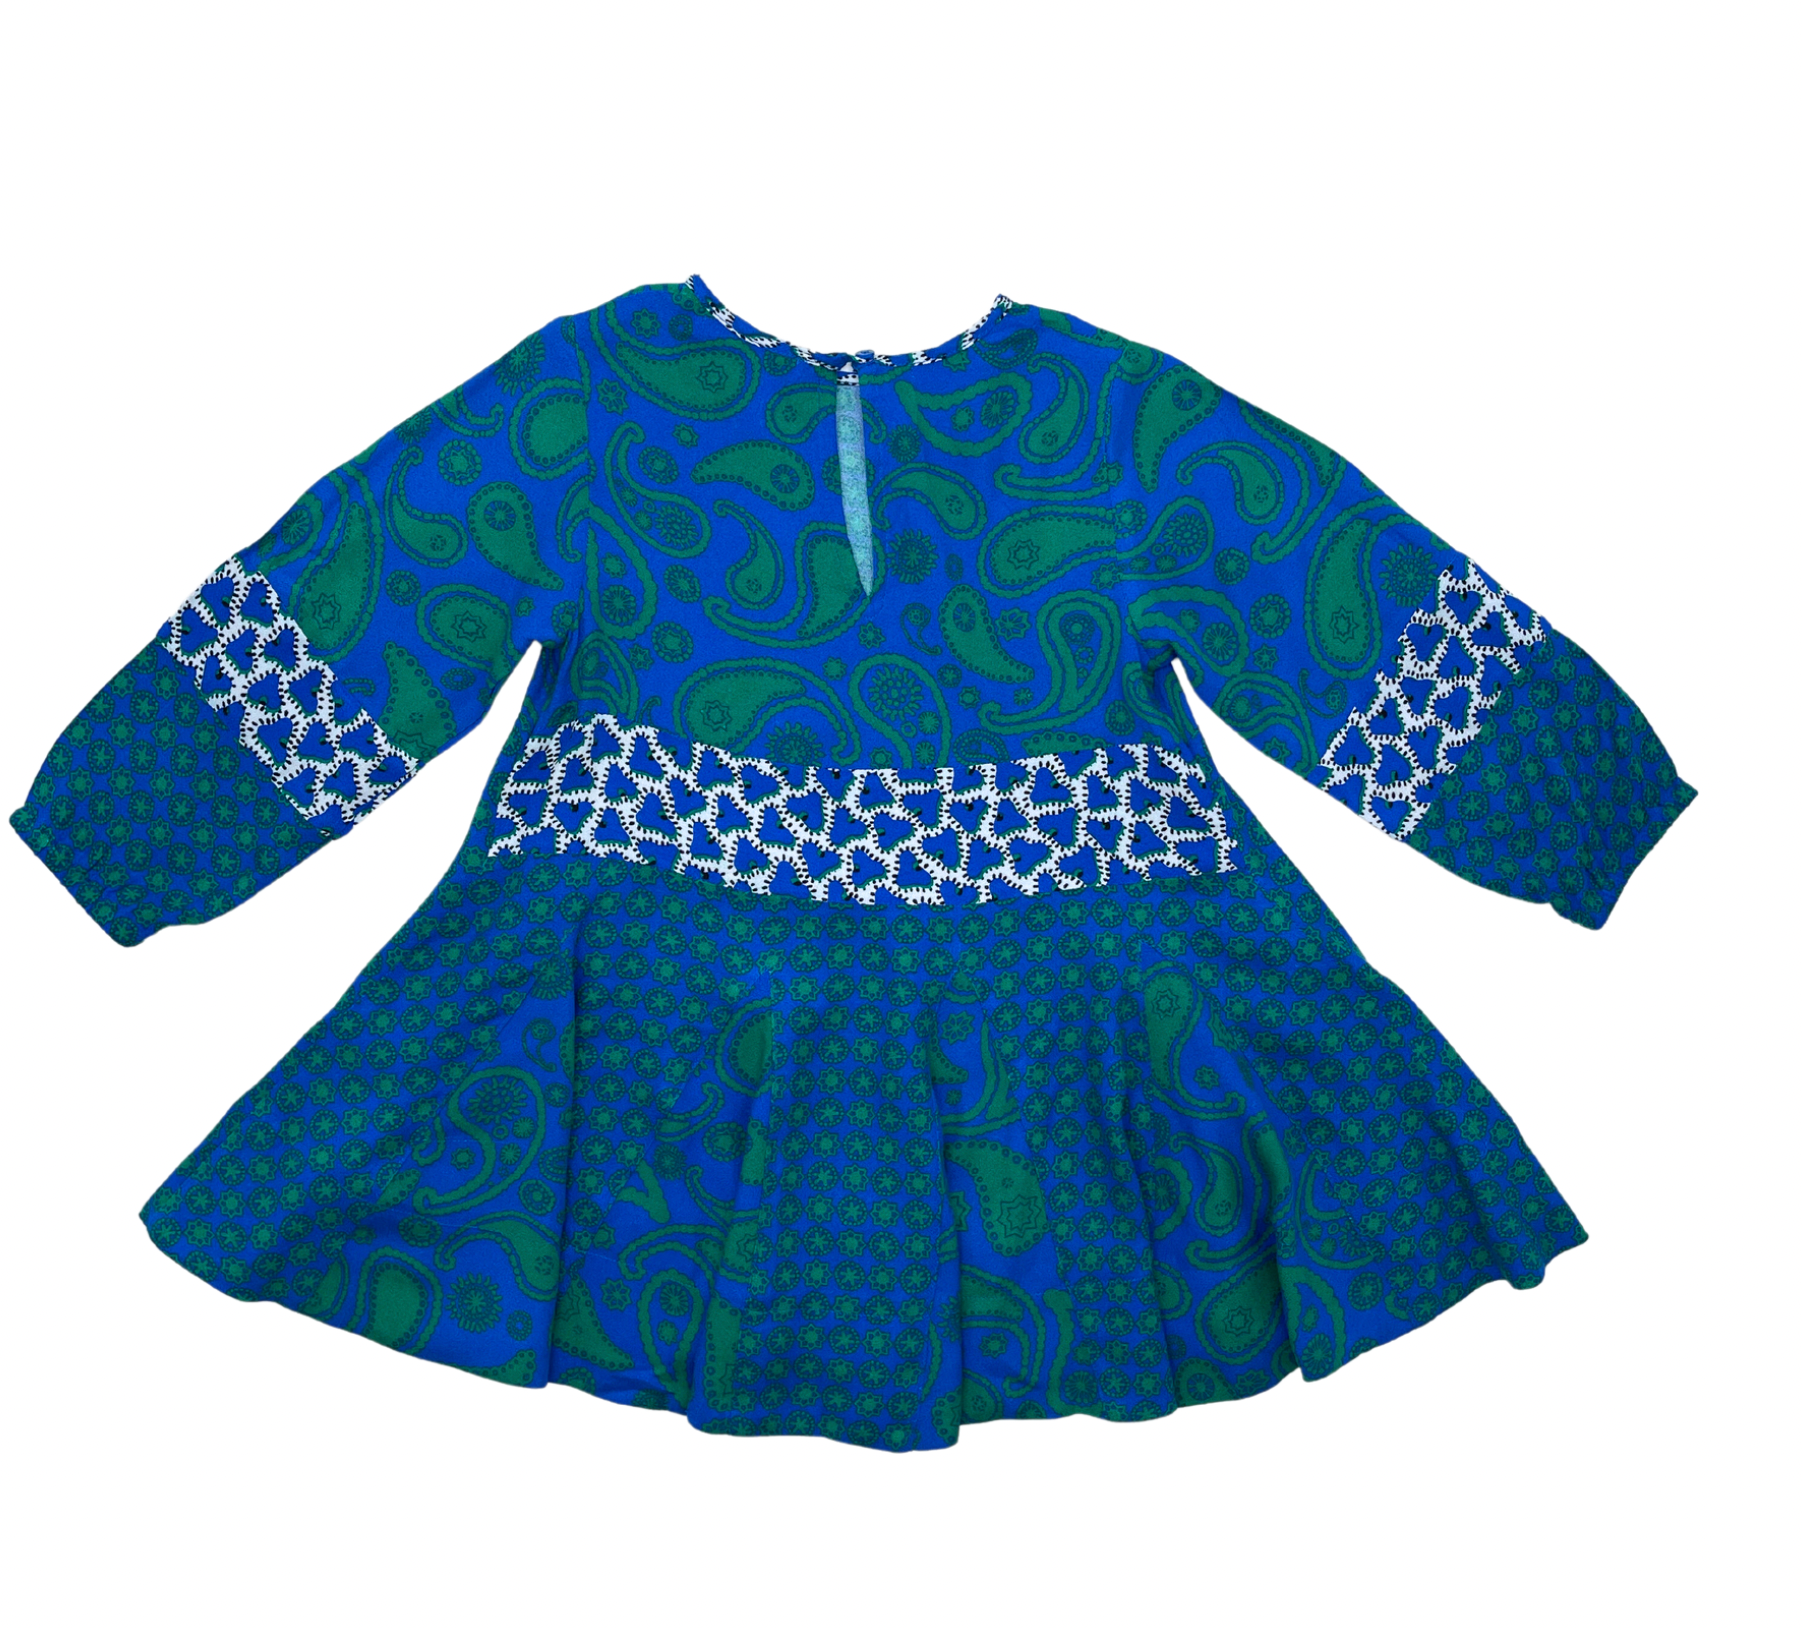 STELLA MCCARTNEY - Blue and green dress - 2 years old